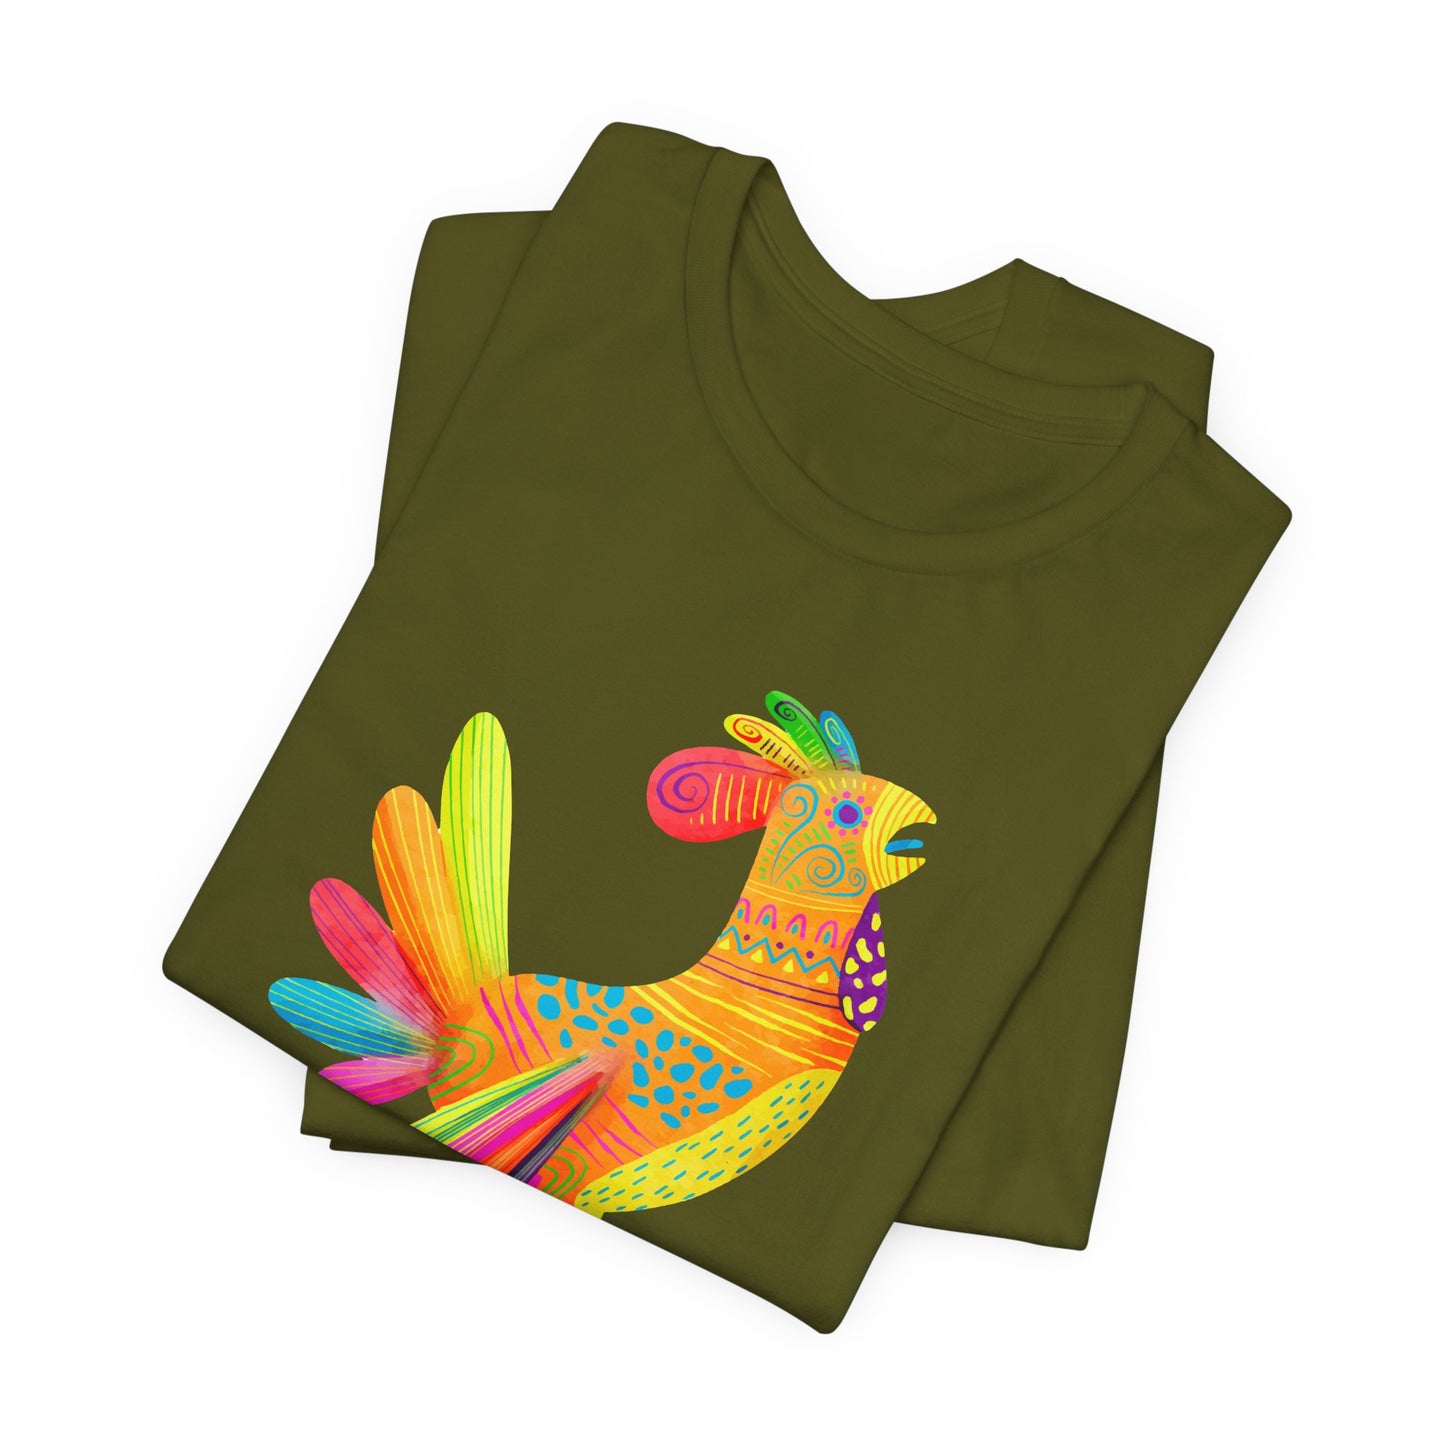 Mexican Folk Art T-Shirt For Watercolor Rooster T Shirt For Cinco de Mayo TShirt